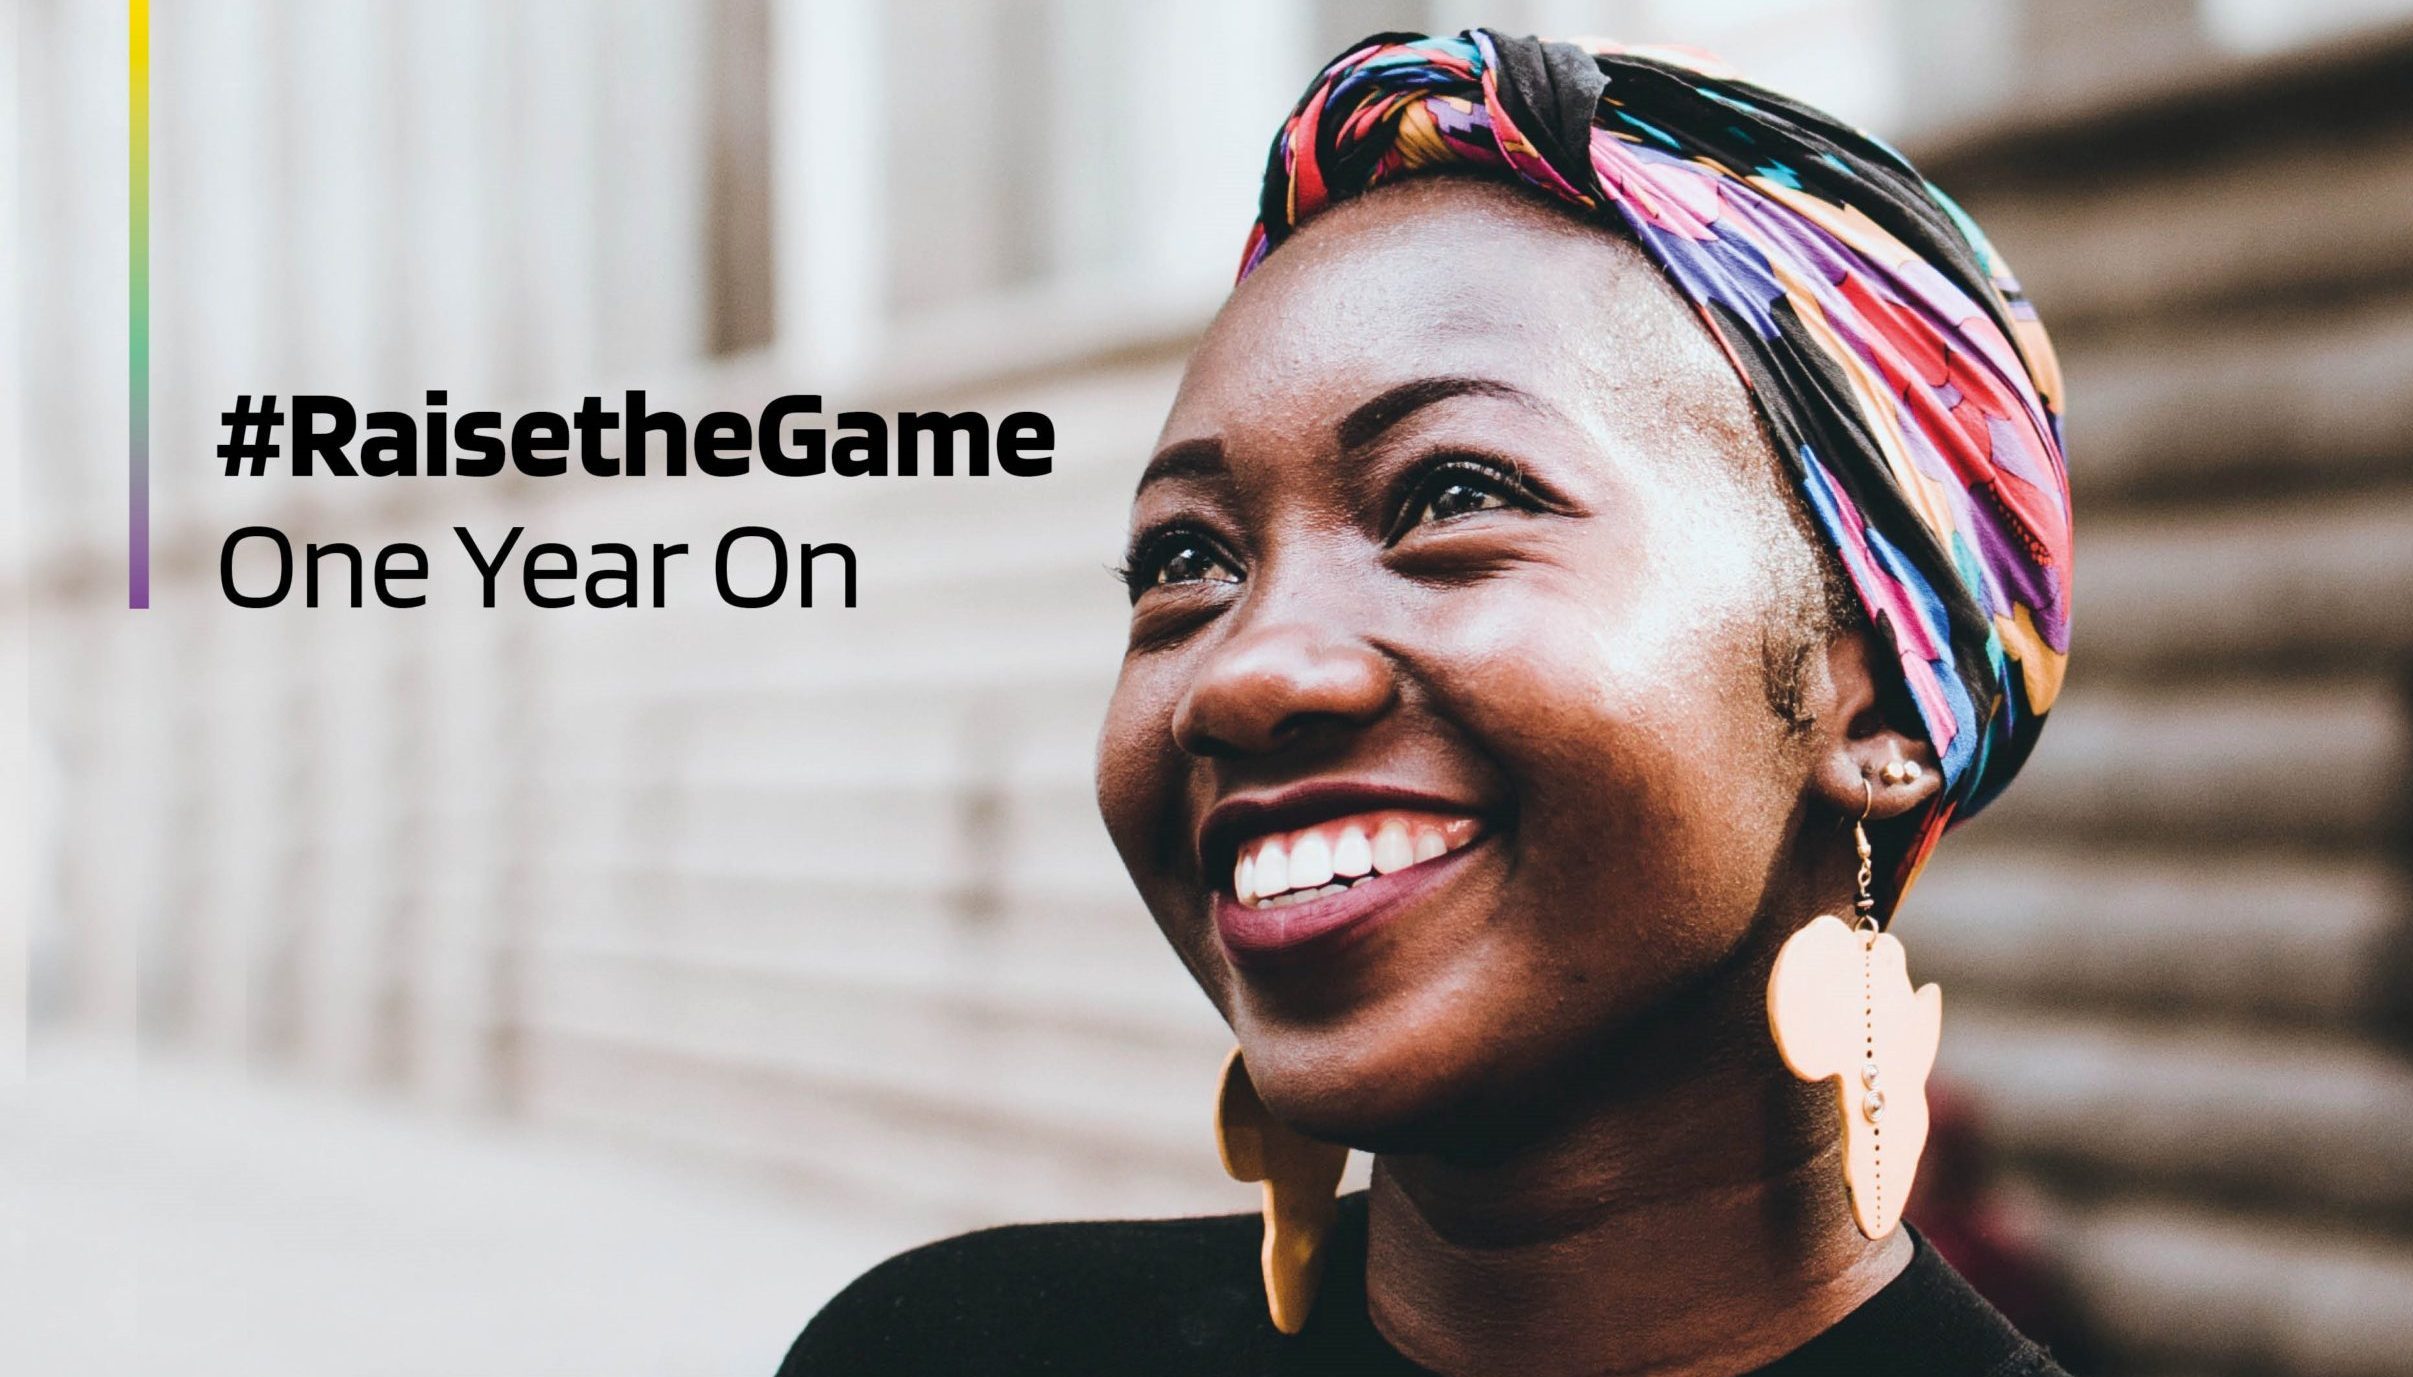 #RaisetheGame in the UK games industry – One Year On Report